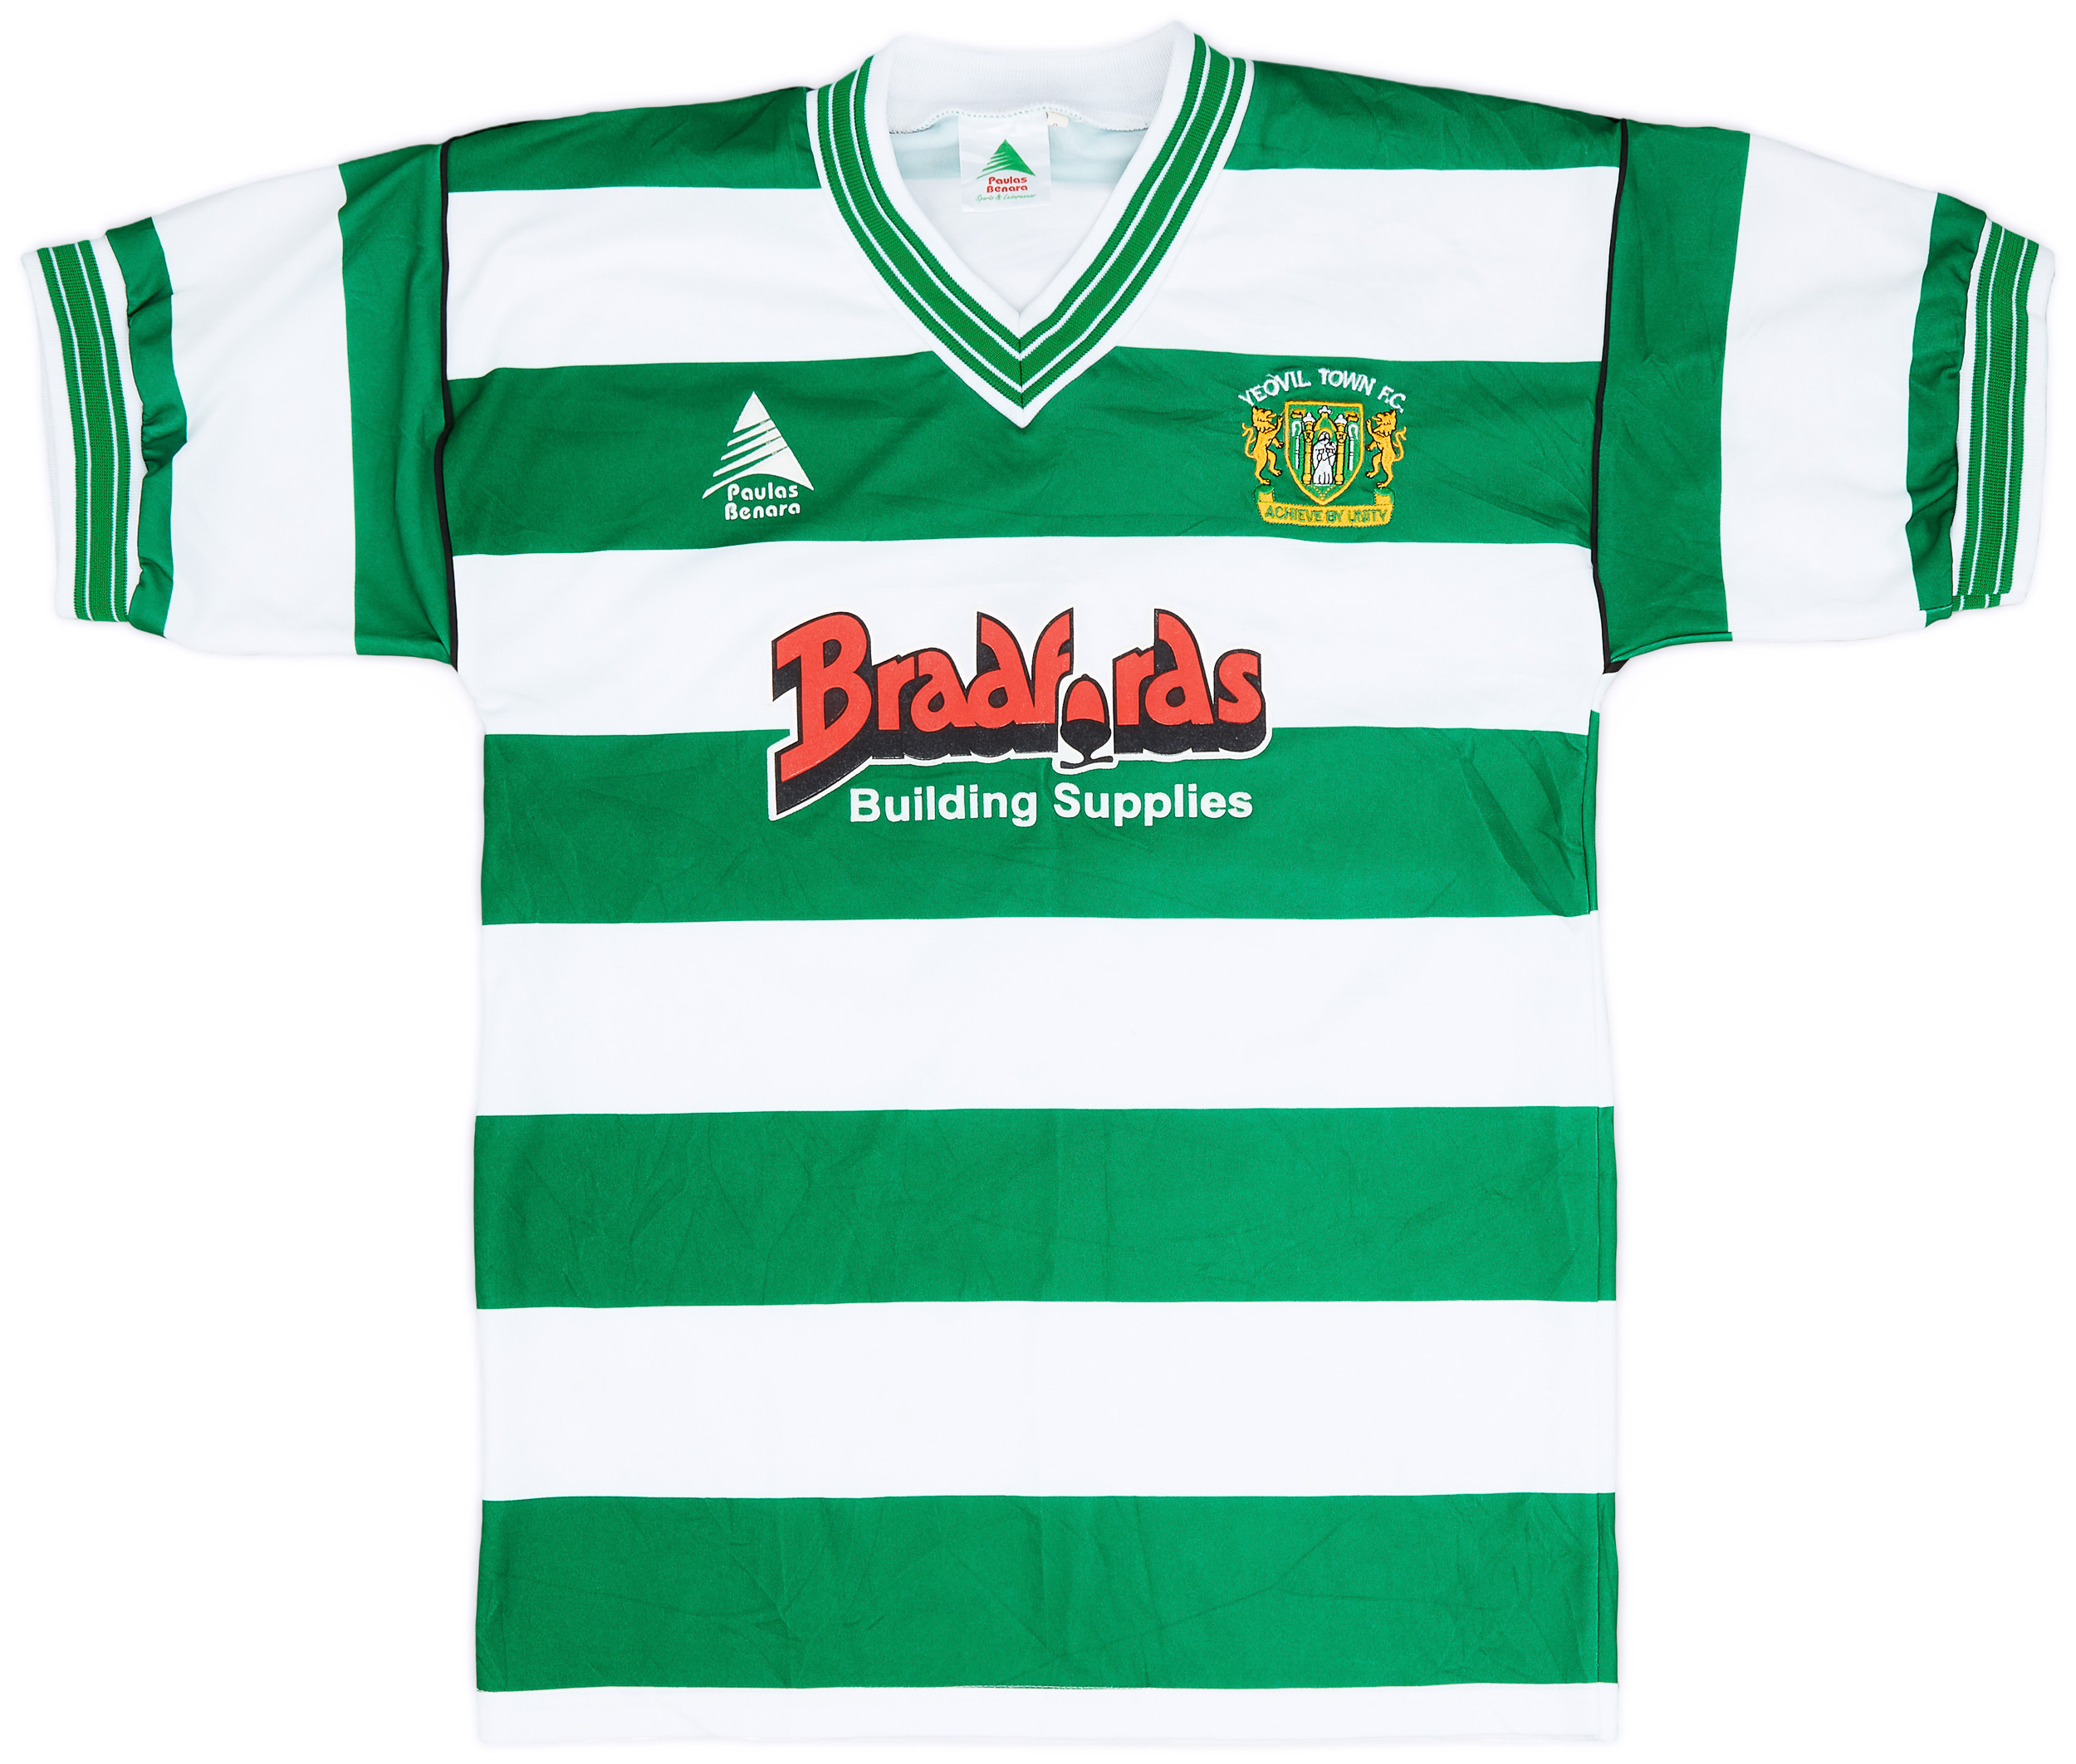 2003-05 Yeovil Town Signed Home Shirt - 9/10 - ()